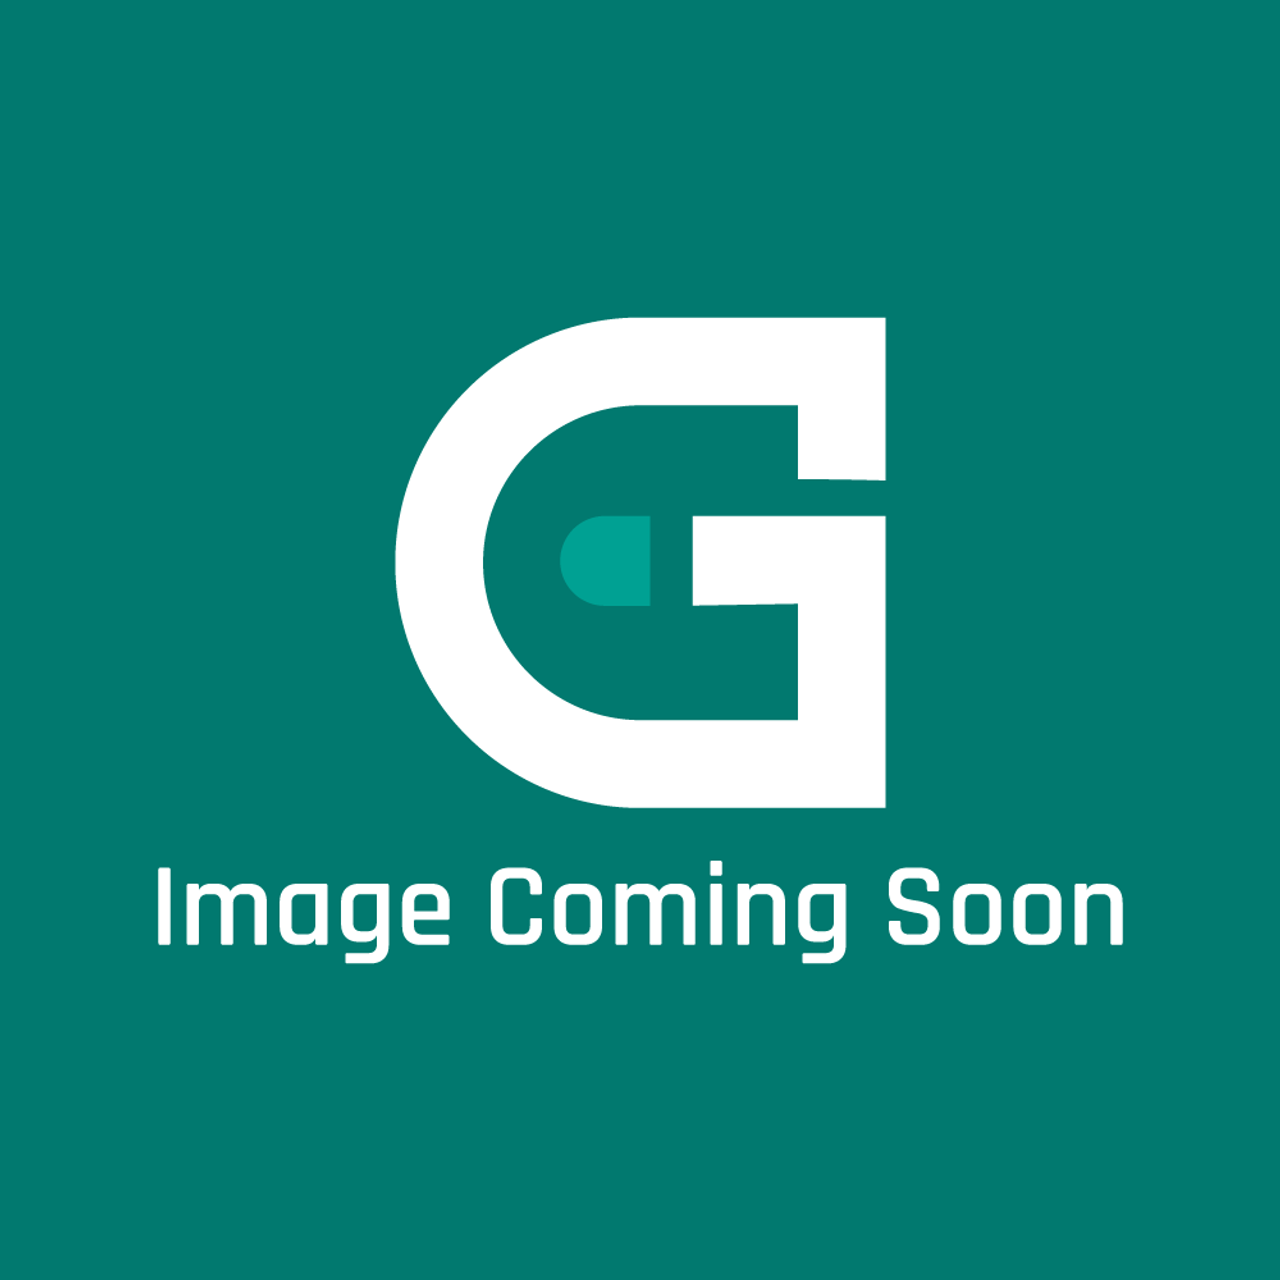 AGA Marvel R4713 - Blr Nozzle (60X80S) 2021204 - Image Coming Soon!